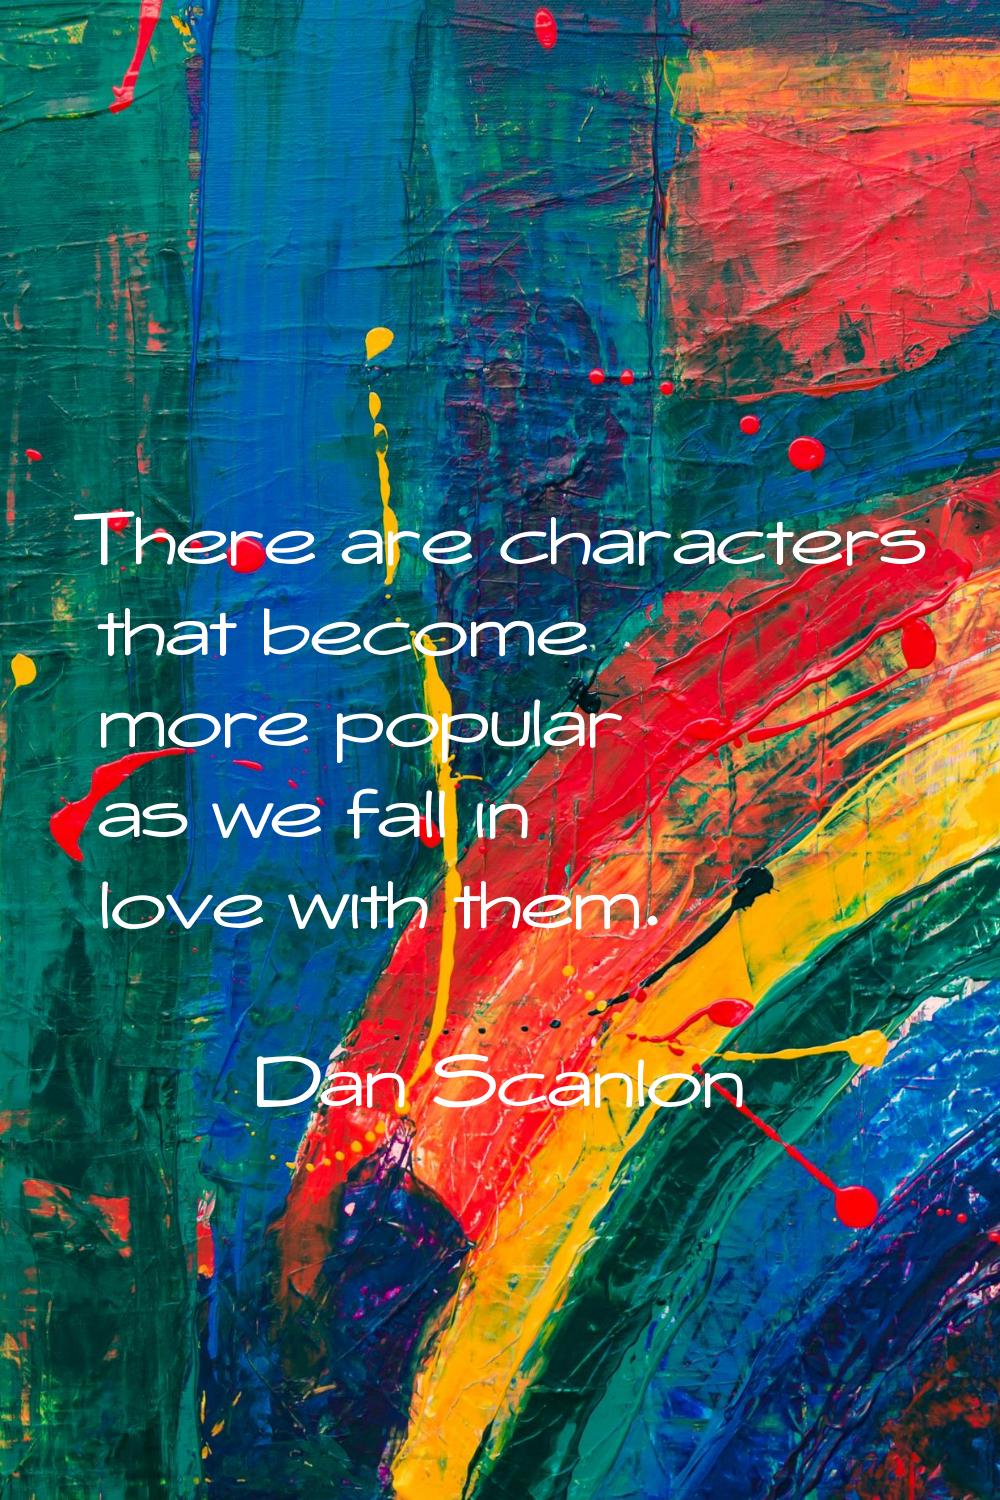 There are characters that become more popular as we fall in love with them.